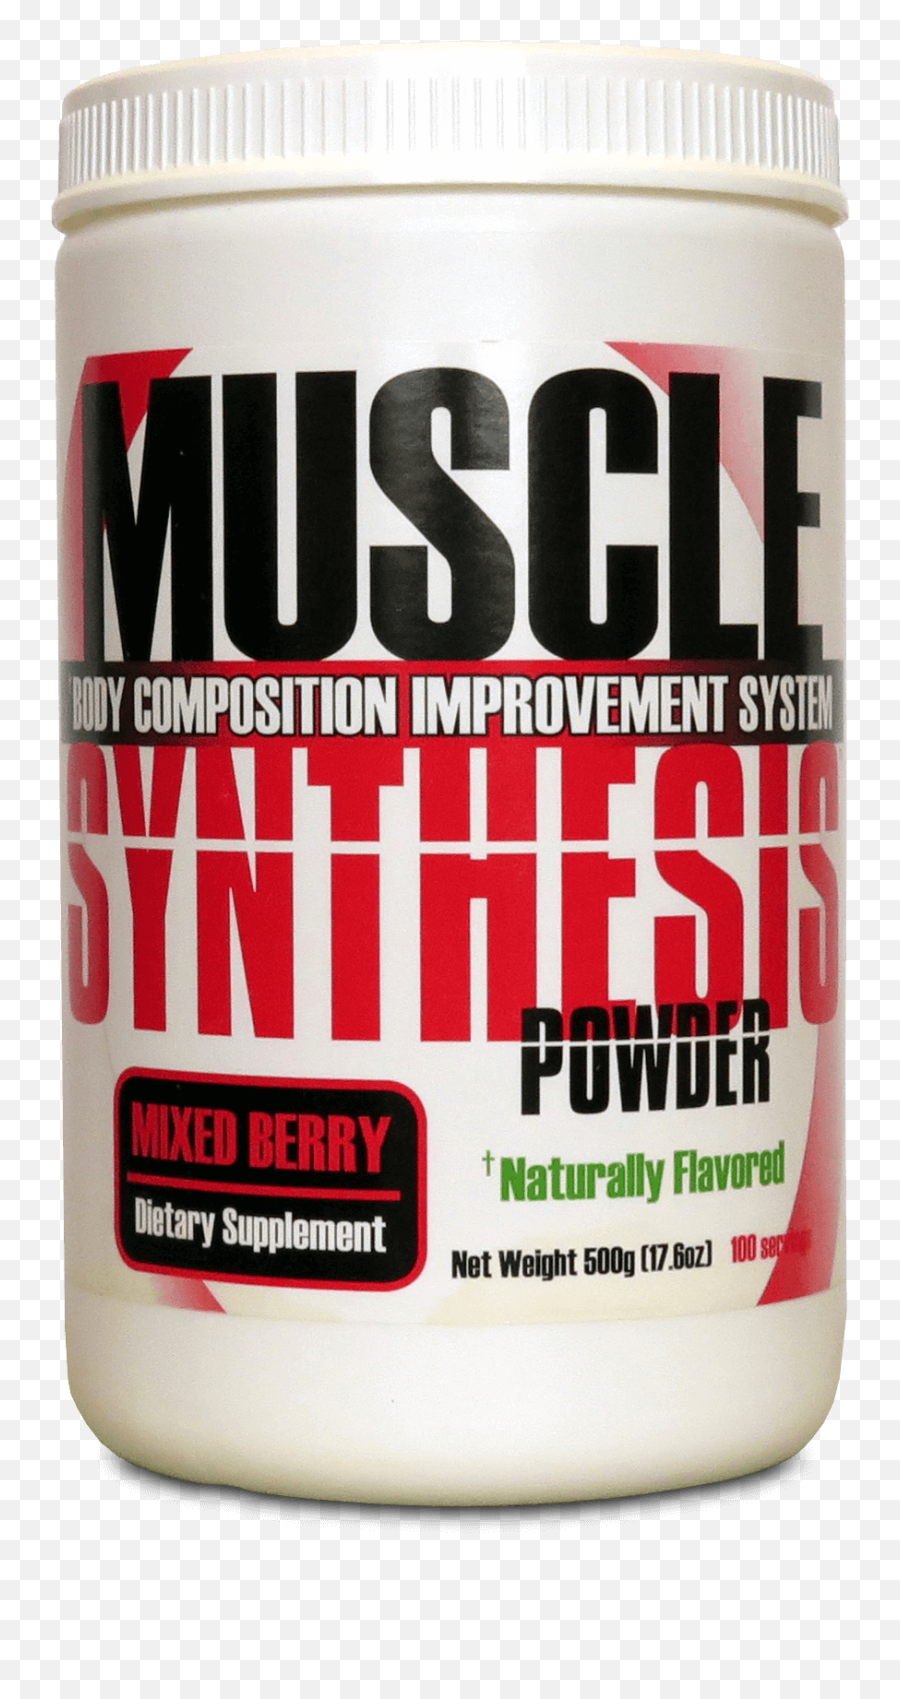 Muscle Synthesis Powder Naturally Flavored - Protein Powder With Methoxy Added Emoji,Superior Flavors Emotions